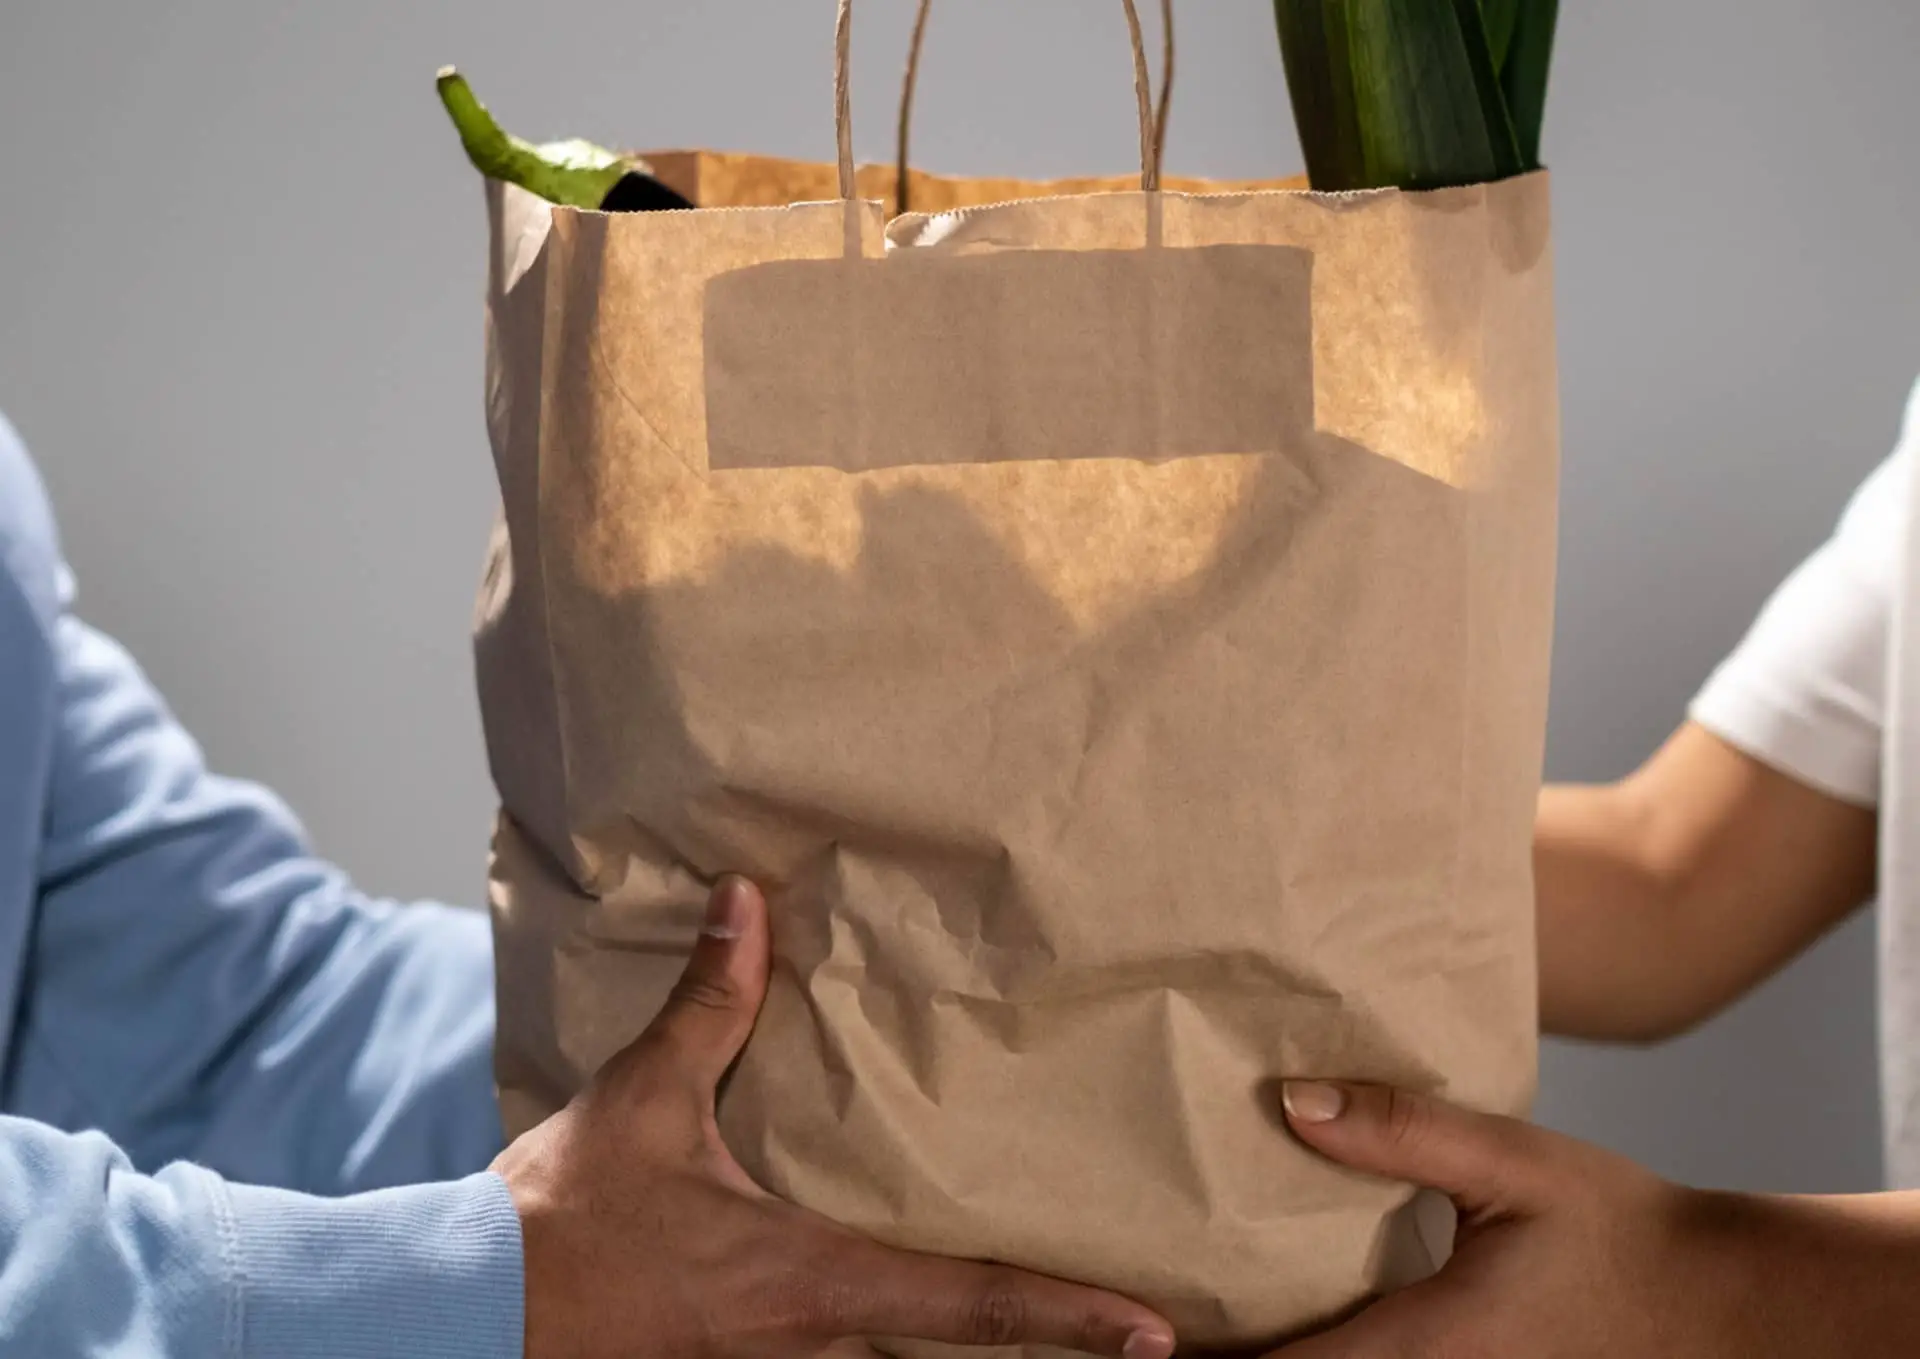 Person handing over bag of produce to another